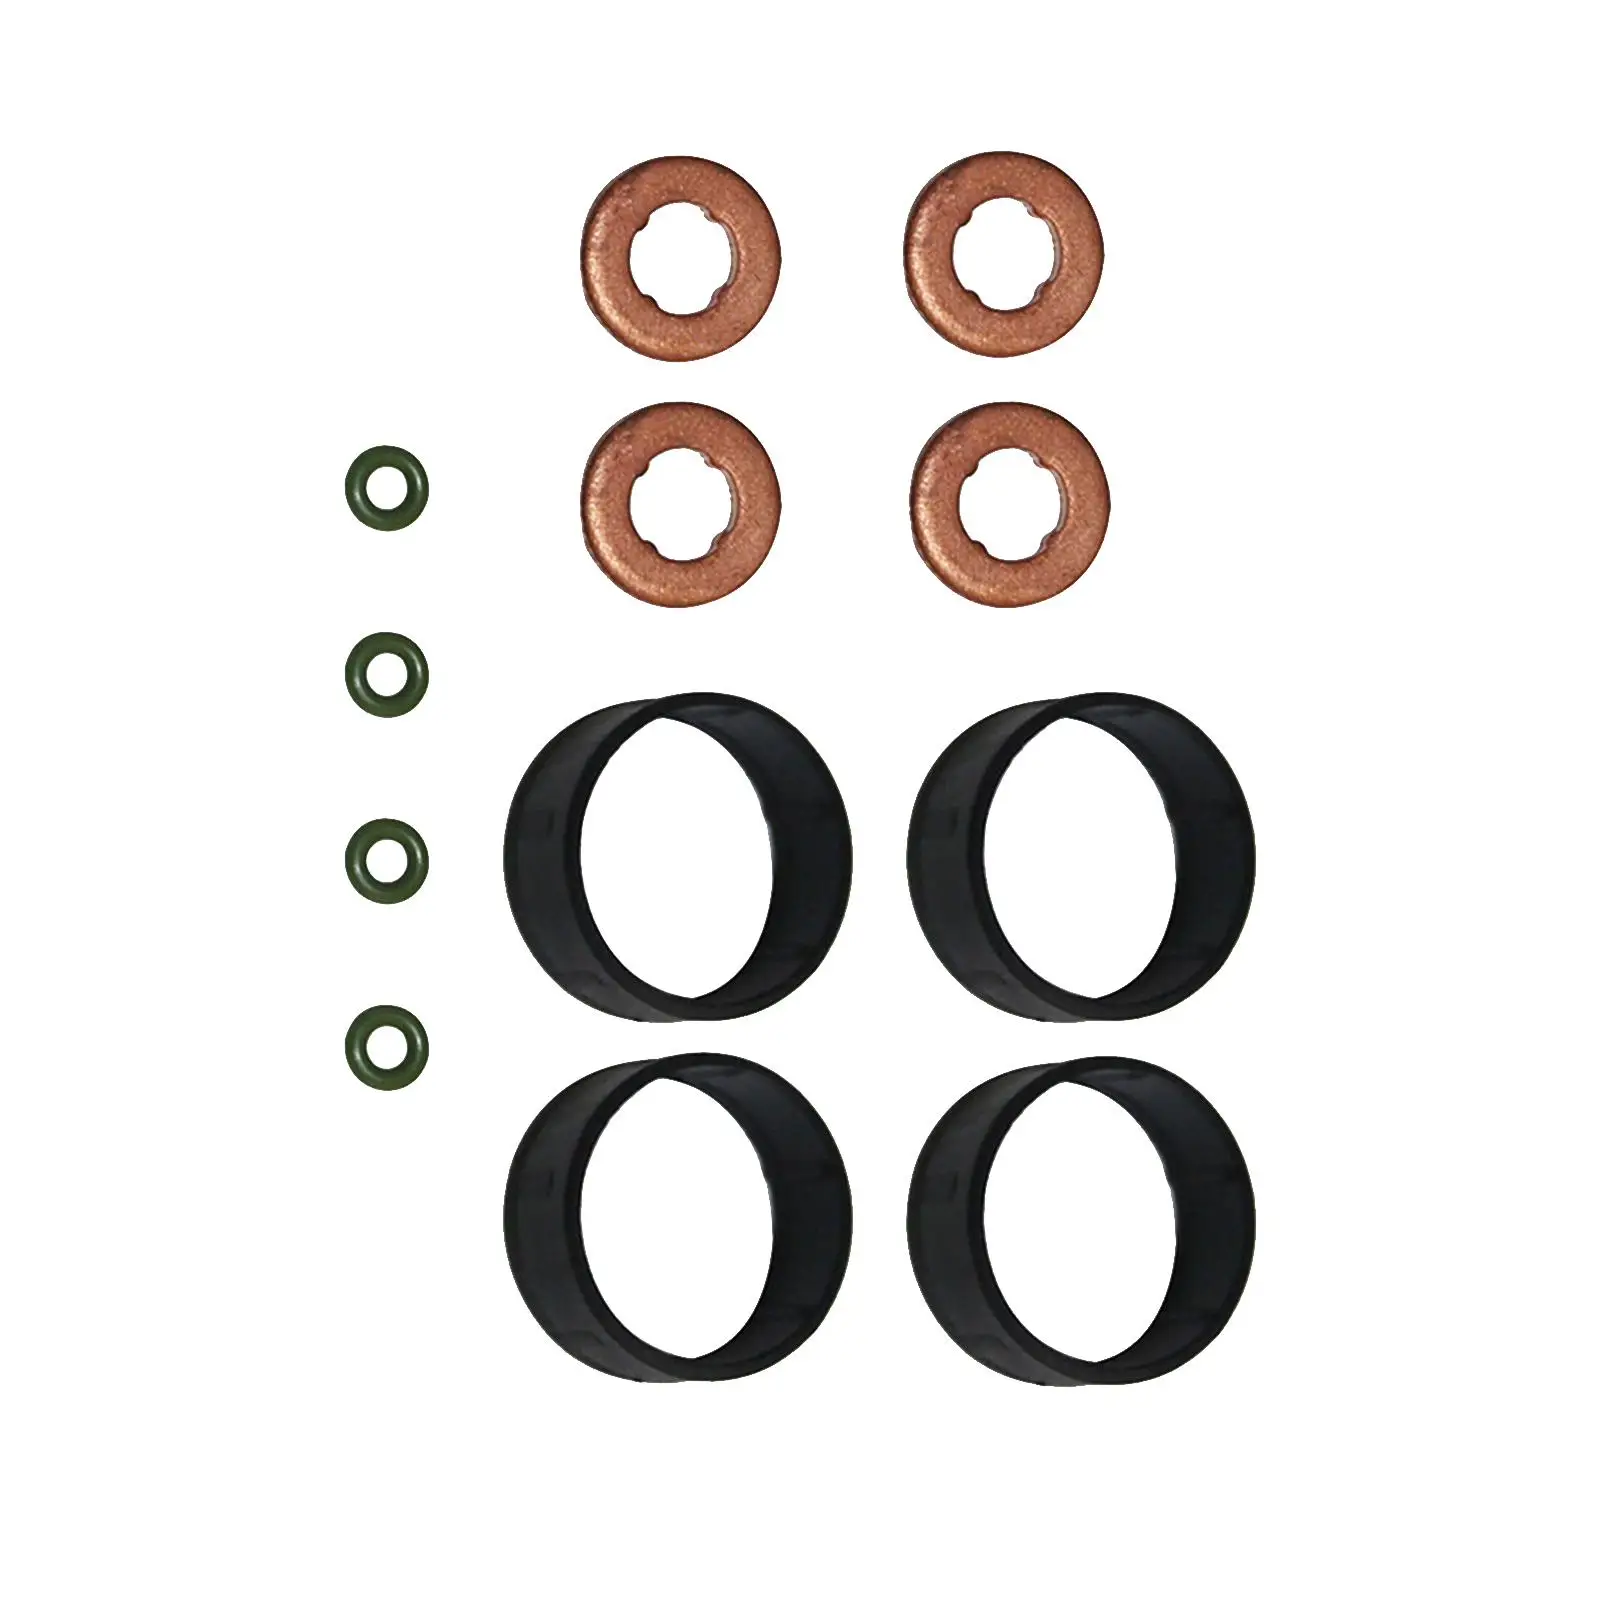 Fuel Injector Seal Washer O-ring Set 1204698 Replacement Parts High Performance for Ford Fiesta Fusion 1.4 Tdci Accessories